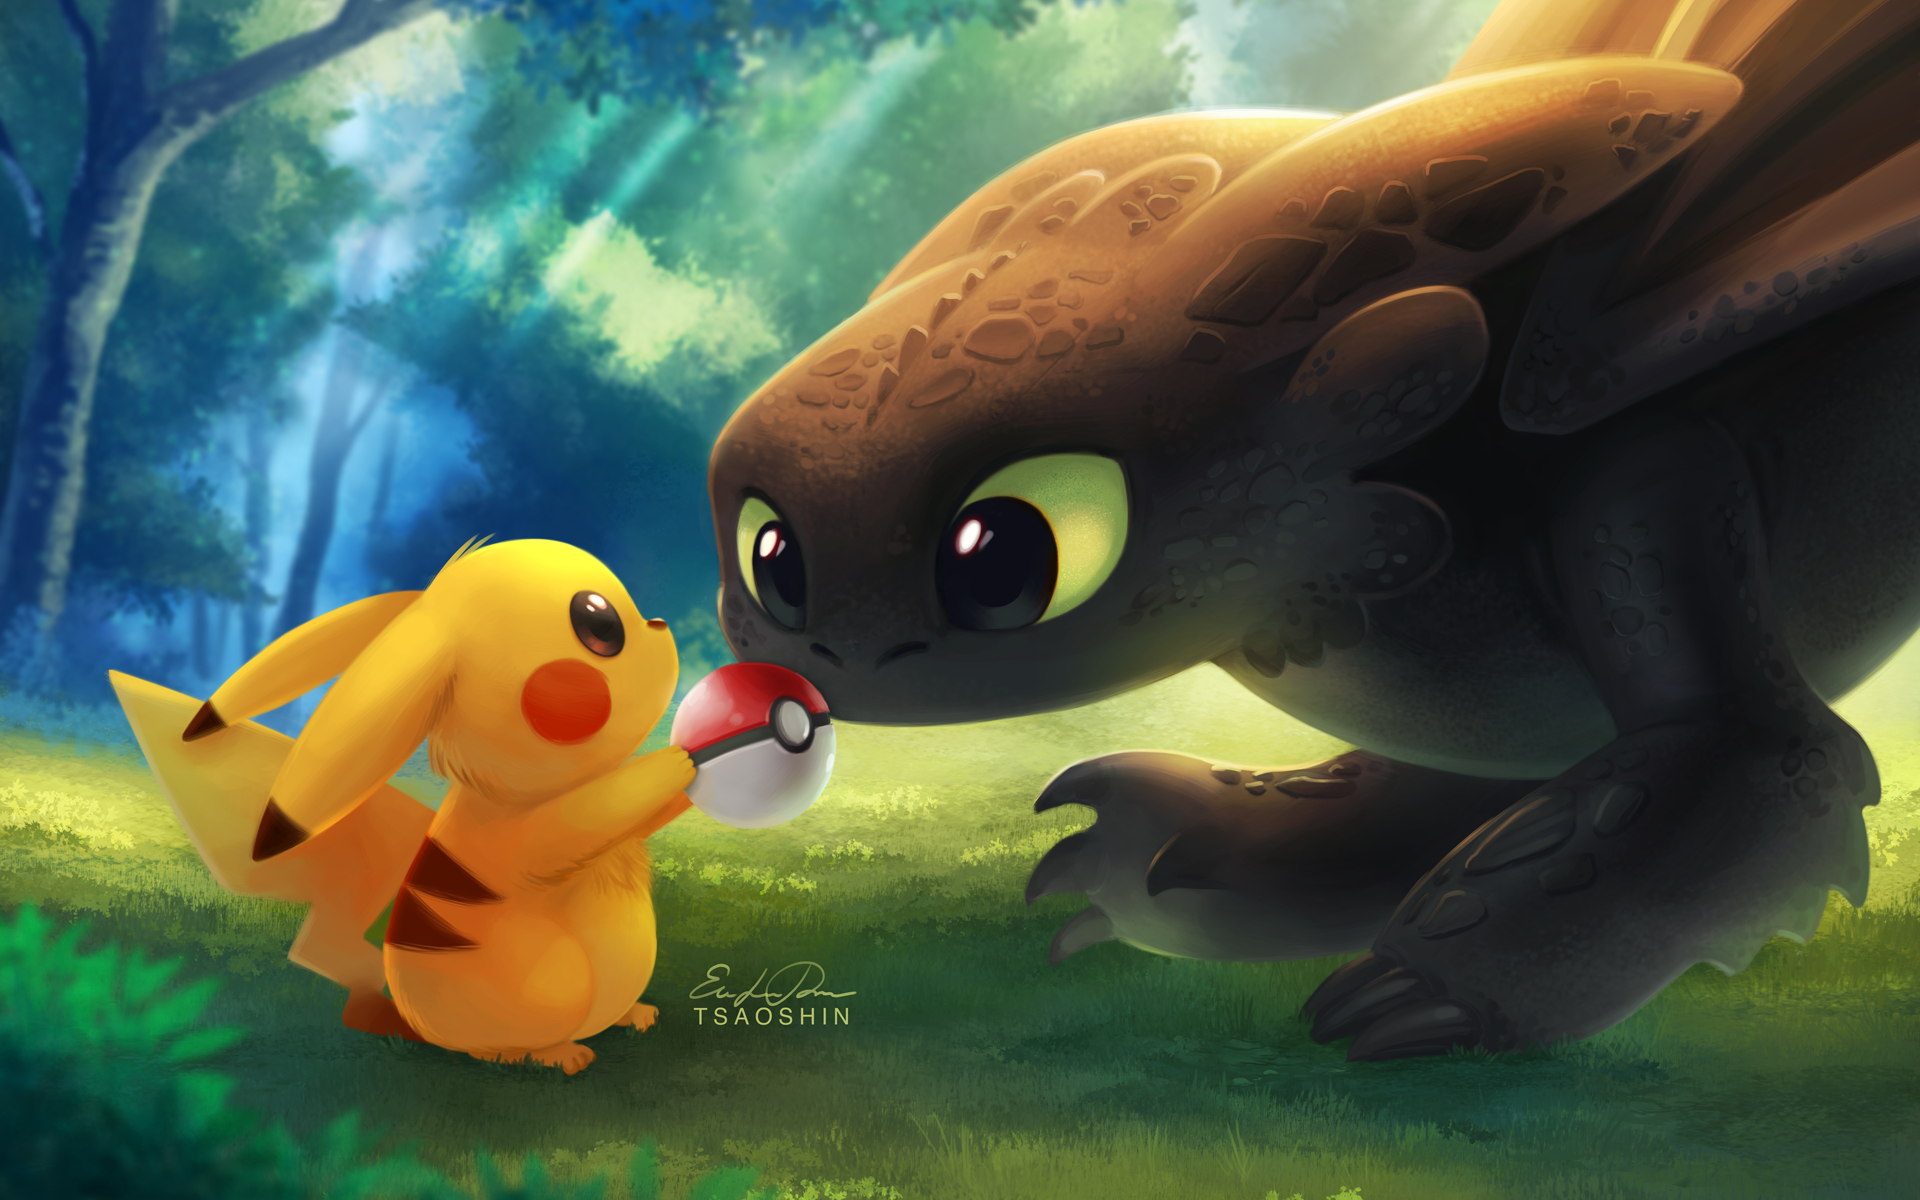 Movie Crossover HD Wallpaper by Eric Proctor